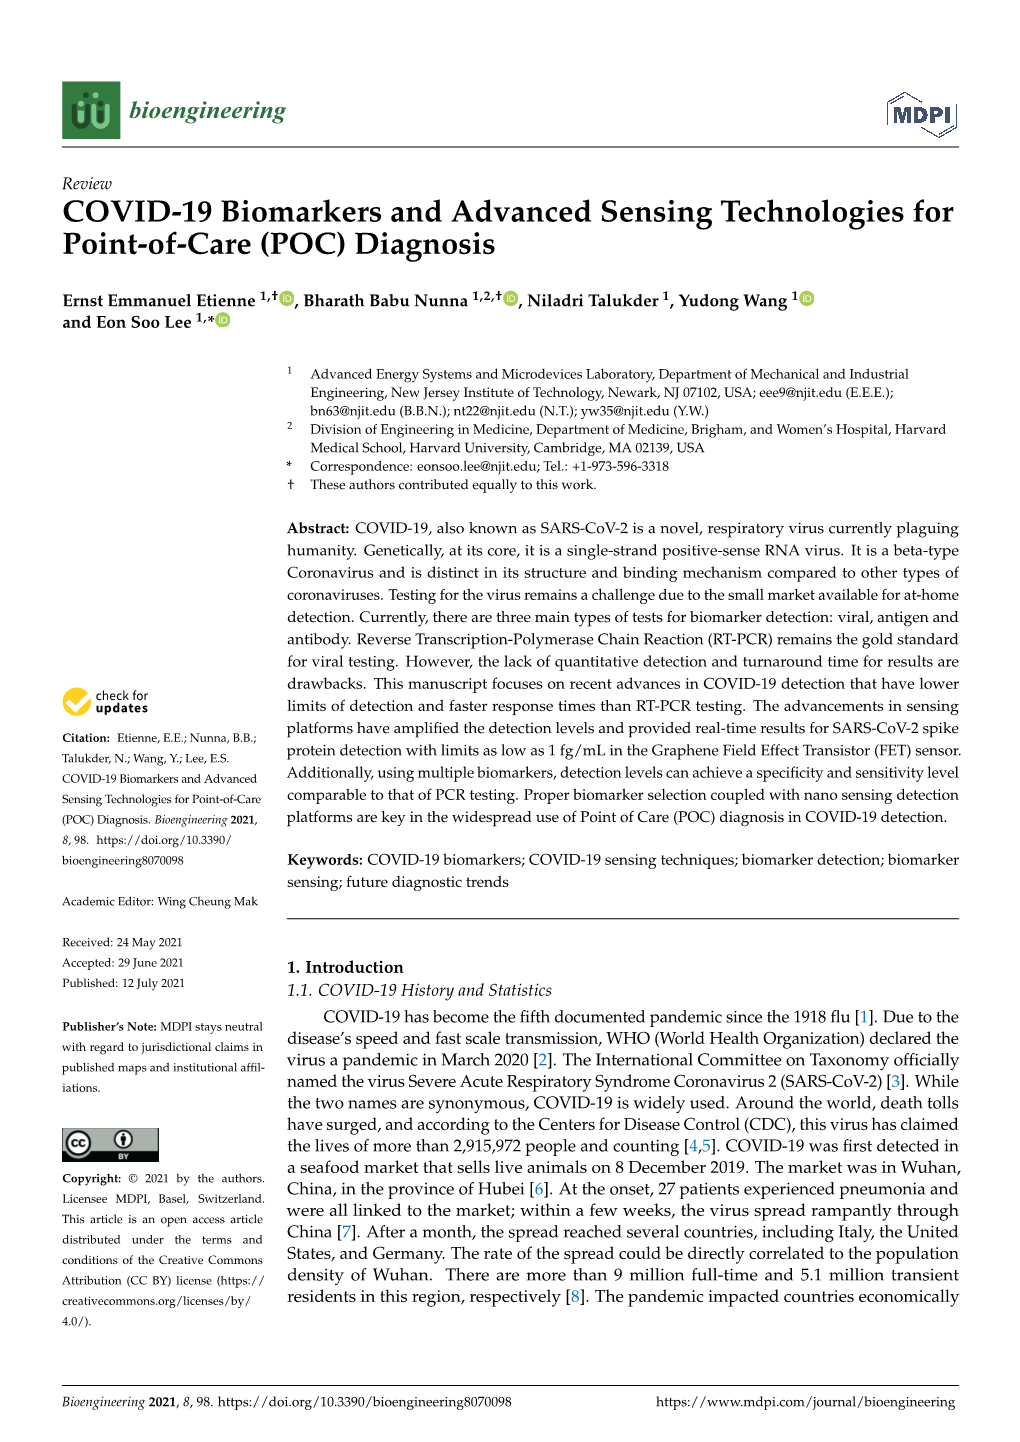 COVID-19 Biomarkers and Advanced Sensing Technologies for Point-Of-Care (POC) Diagnosis